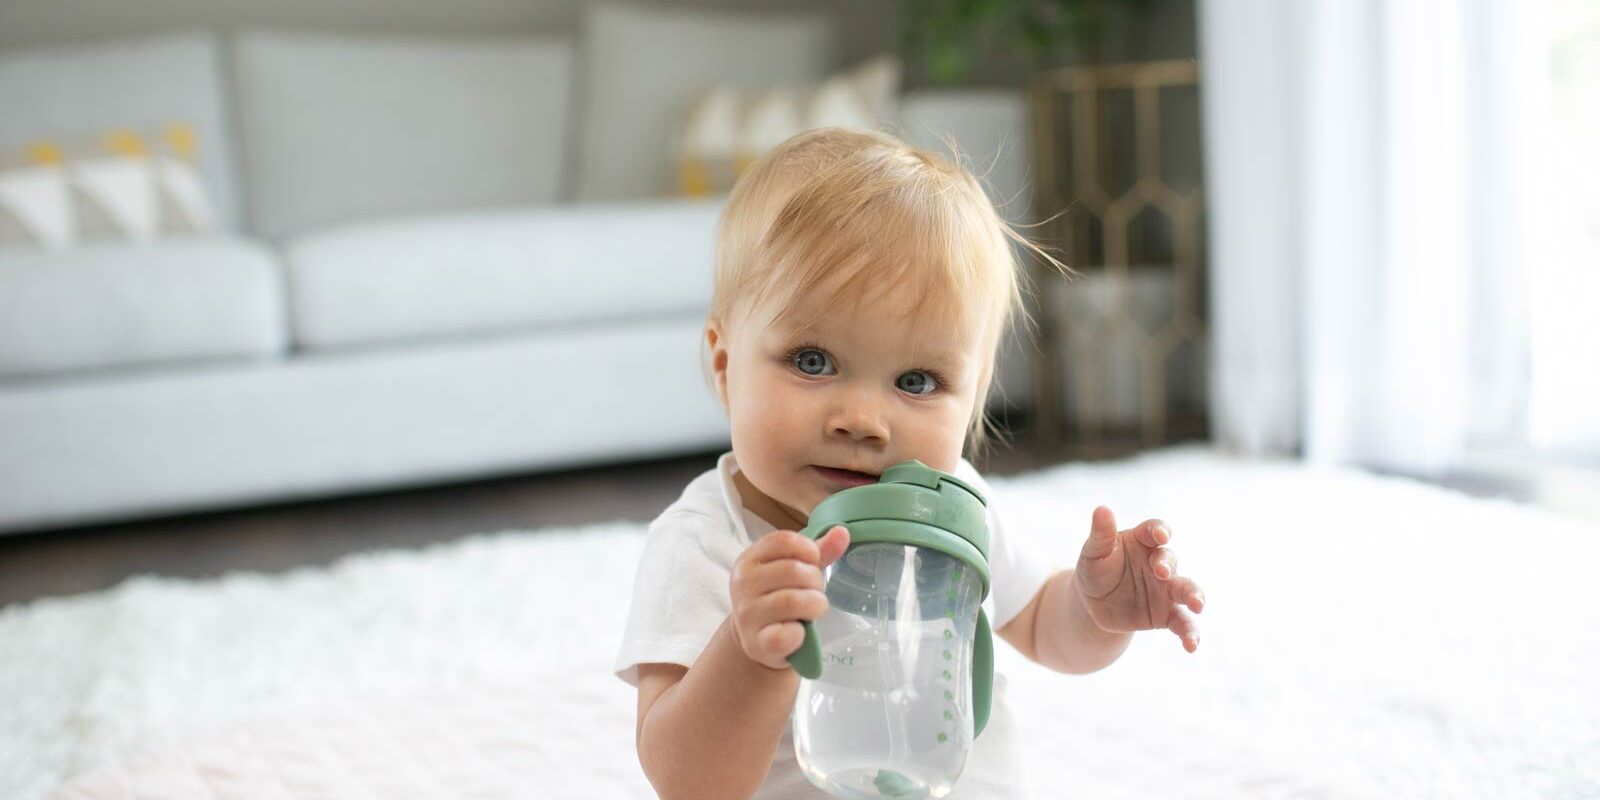 Baby with holding a green straw cup